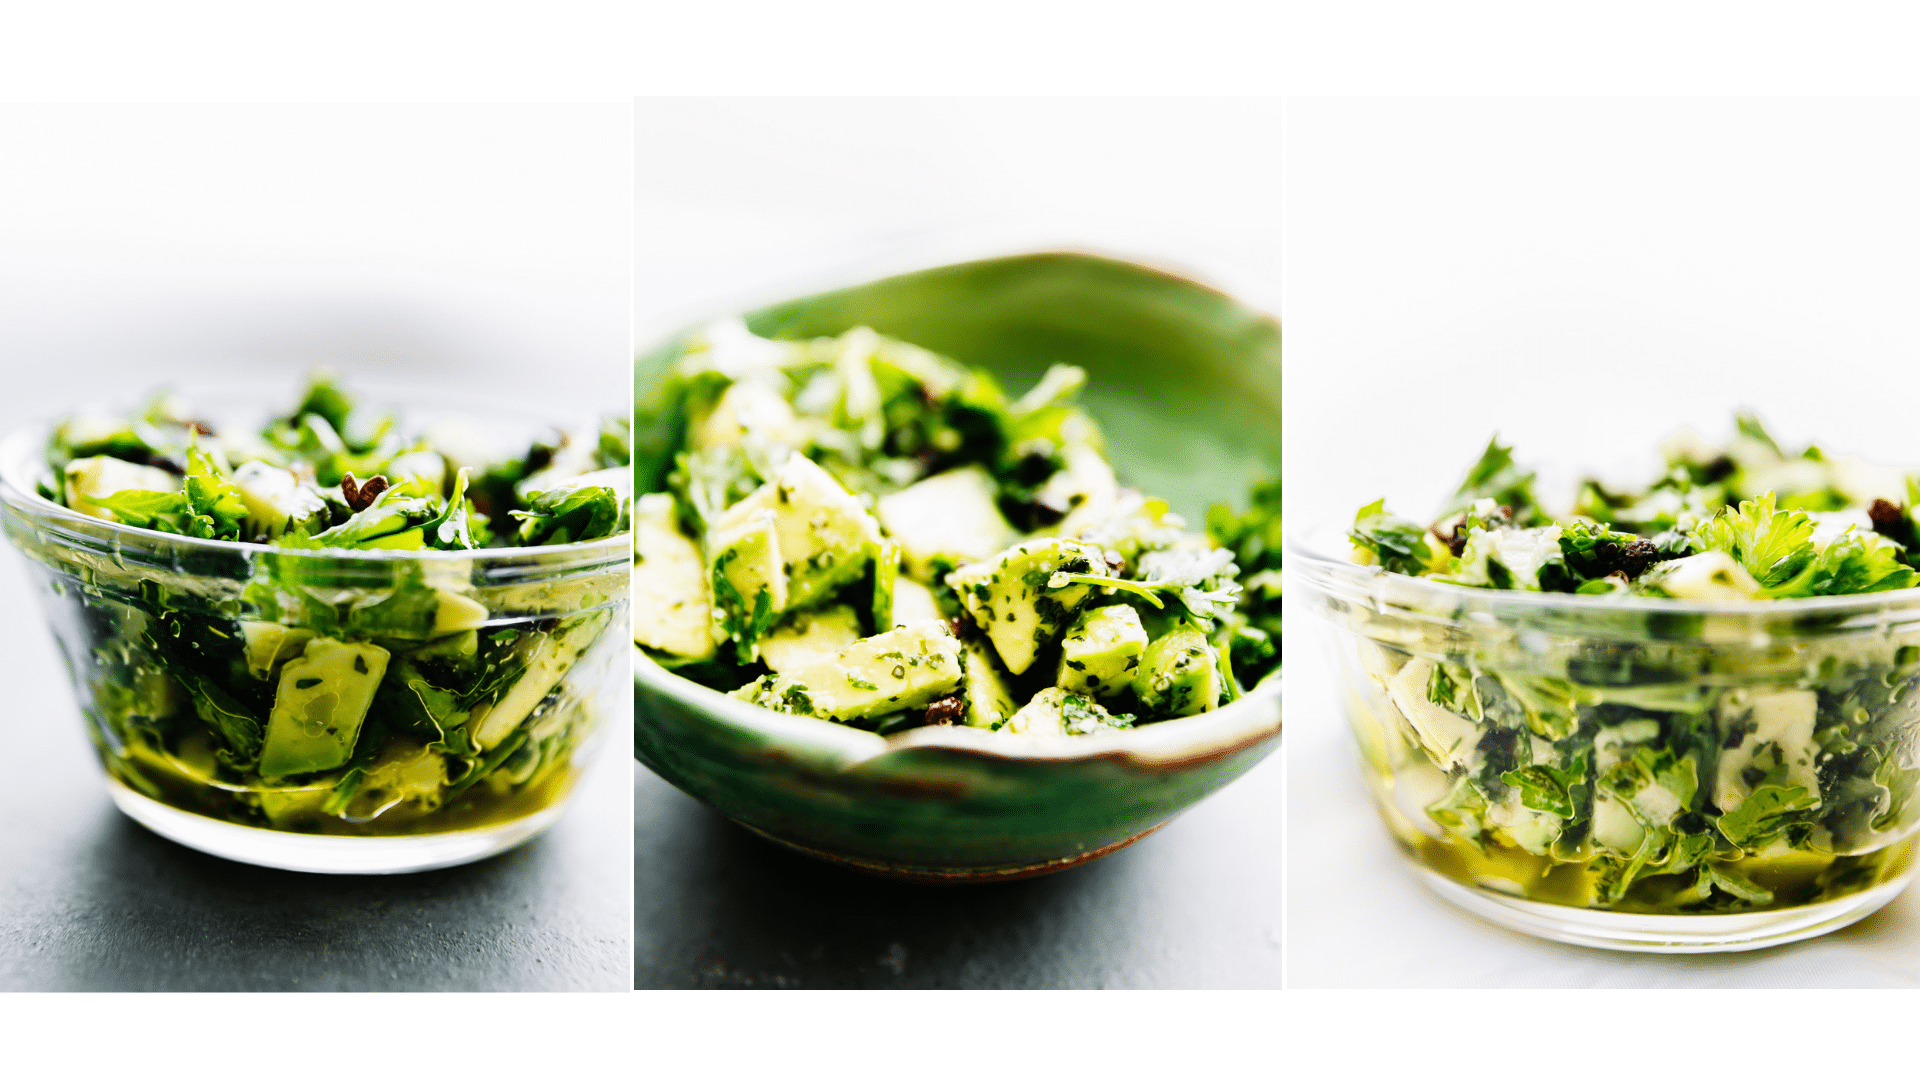 Collage of images for avocado gremolata; in clear glass bowl, in turquoise bowl and side view in glass jar.